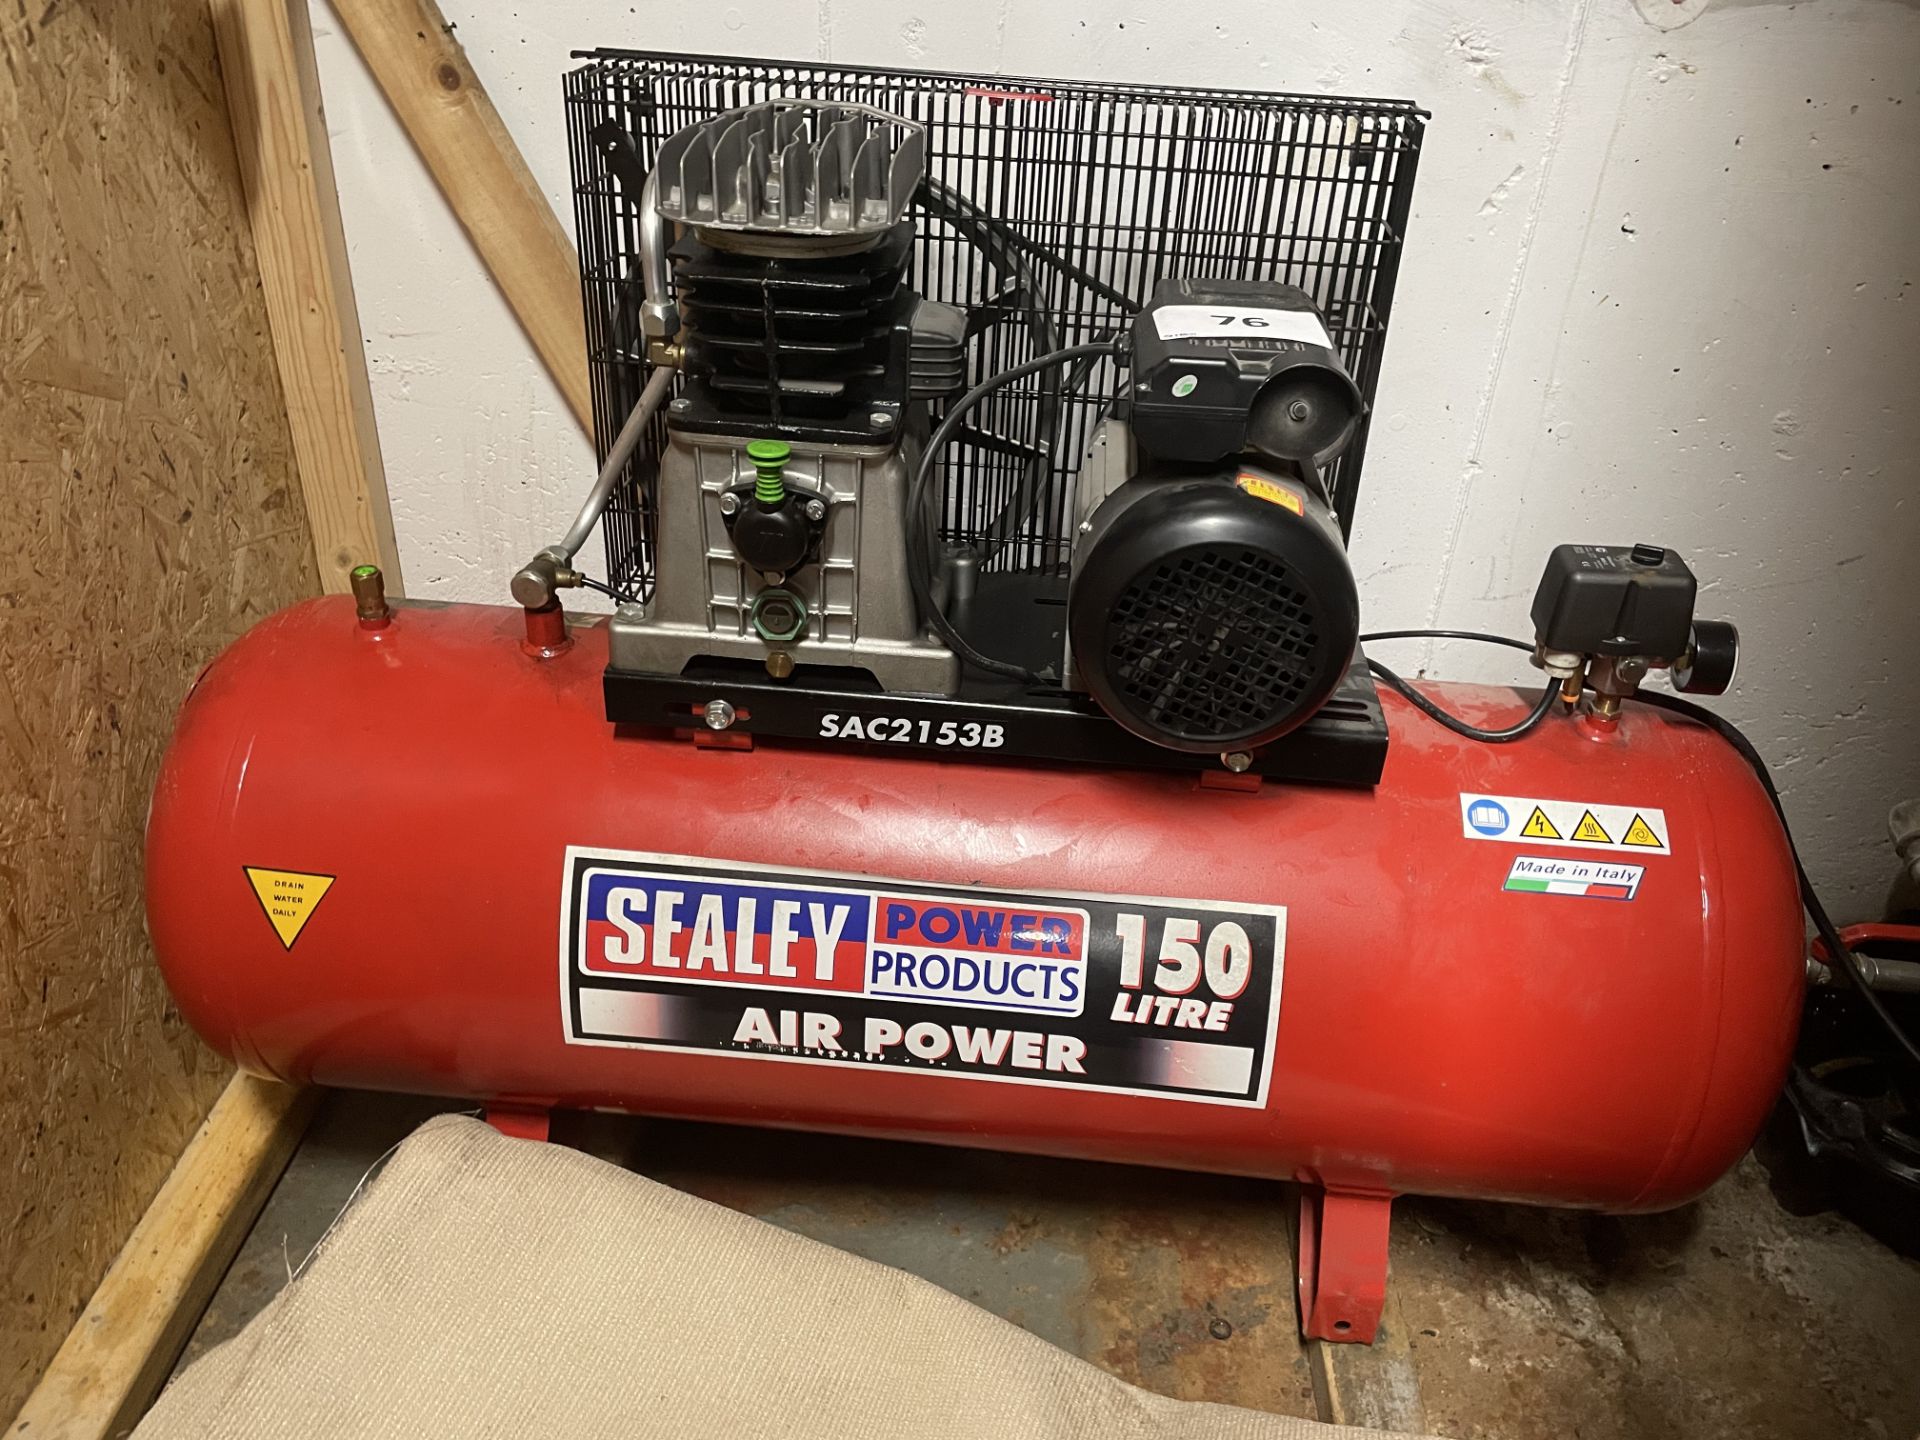 Sealey Power products 150l Air Compressor with Single Phase Horizontal Receiver - Image 2 of 3